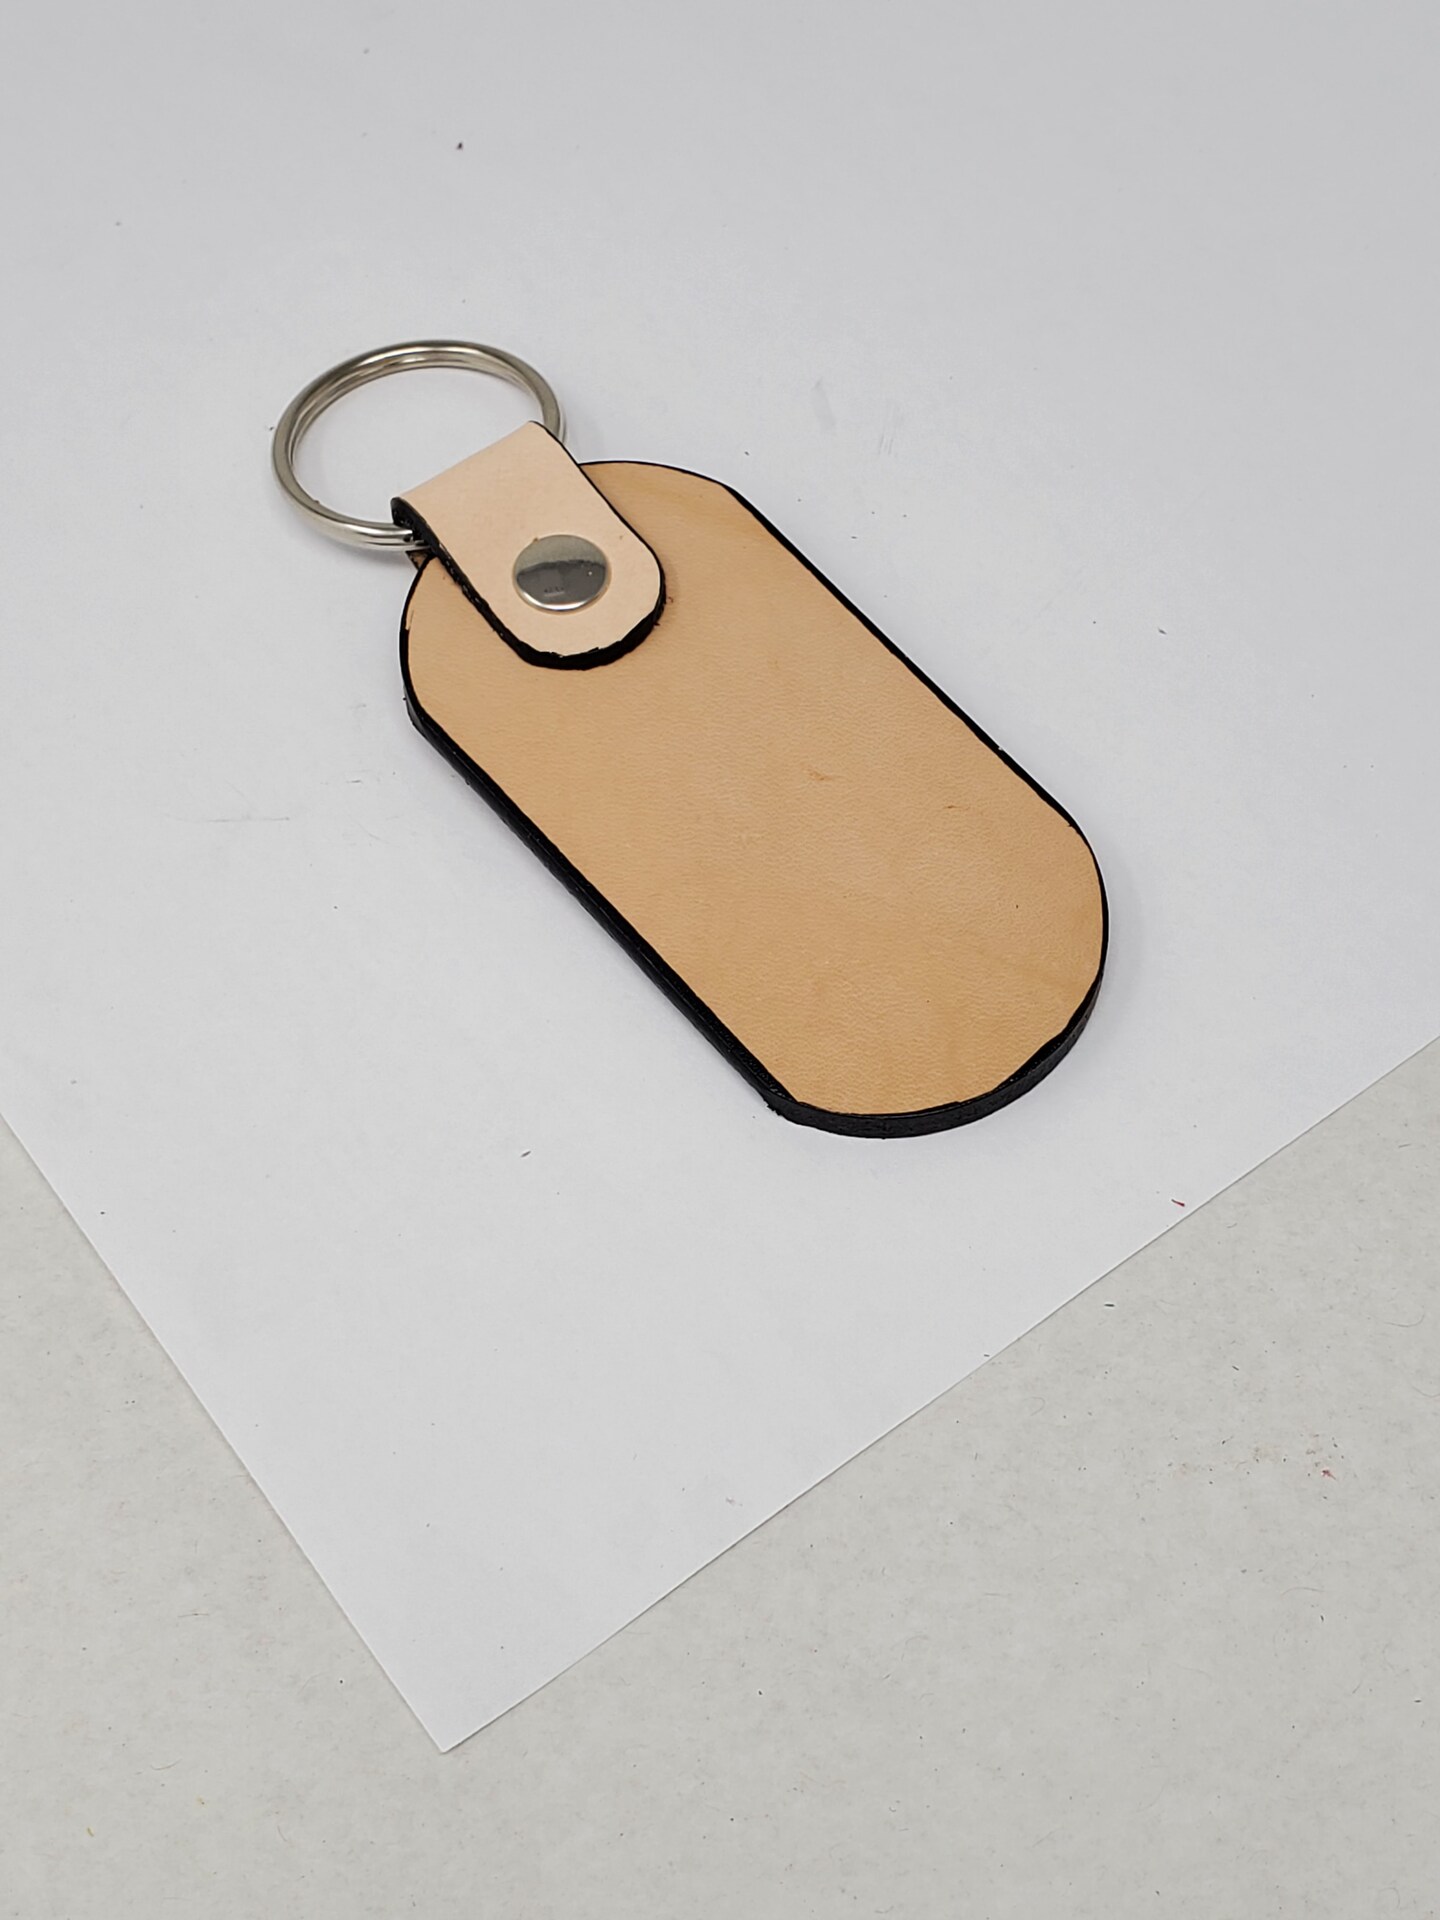 Blank Leather Keychains ready to be Personalized-10 pack Leather Keyrings Blanks-Stamping, Tooling, Embossing, Engraving and Painting ready